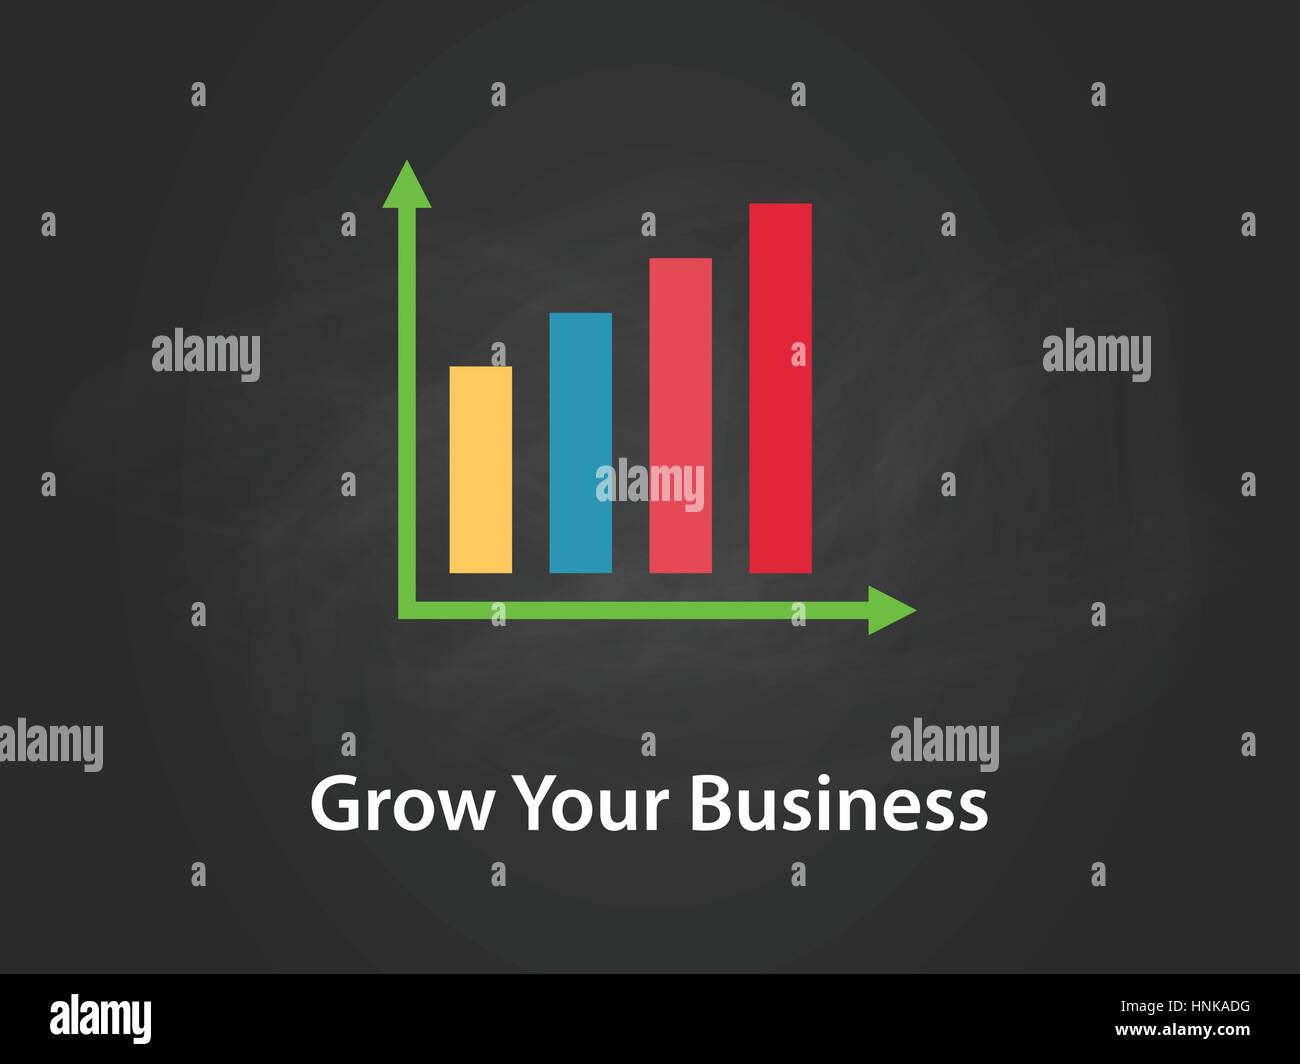 grow your business chart illustration with colourful bar, white text and black background Stock Vector